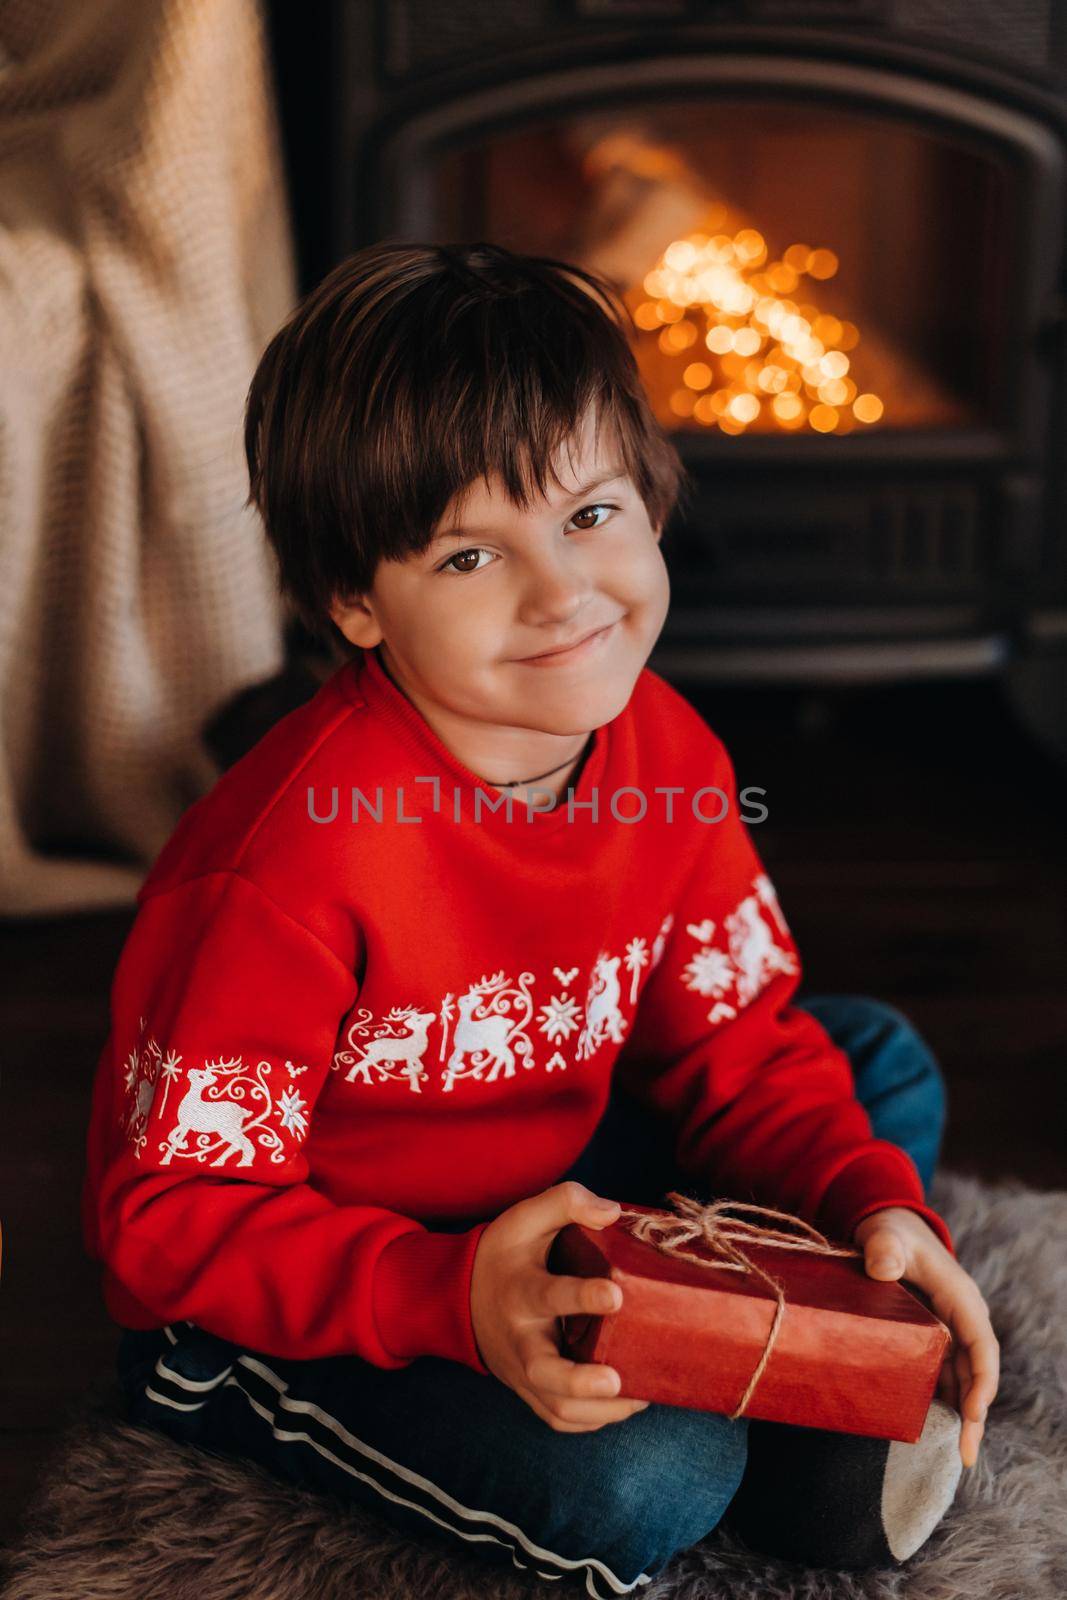 portrait of a smiling boy with a gift in his hands near the fireplace at home.